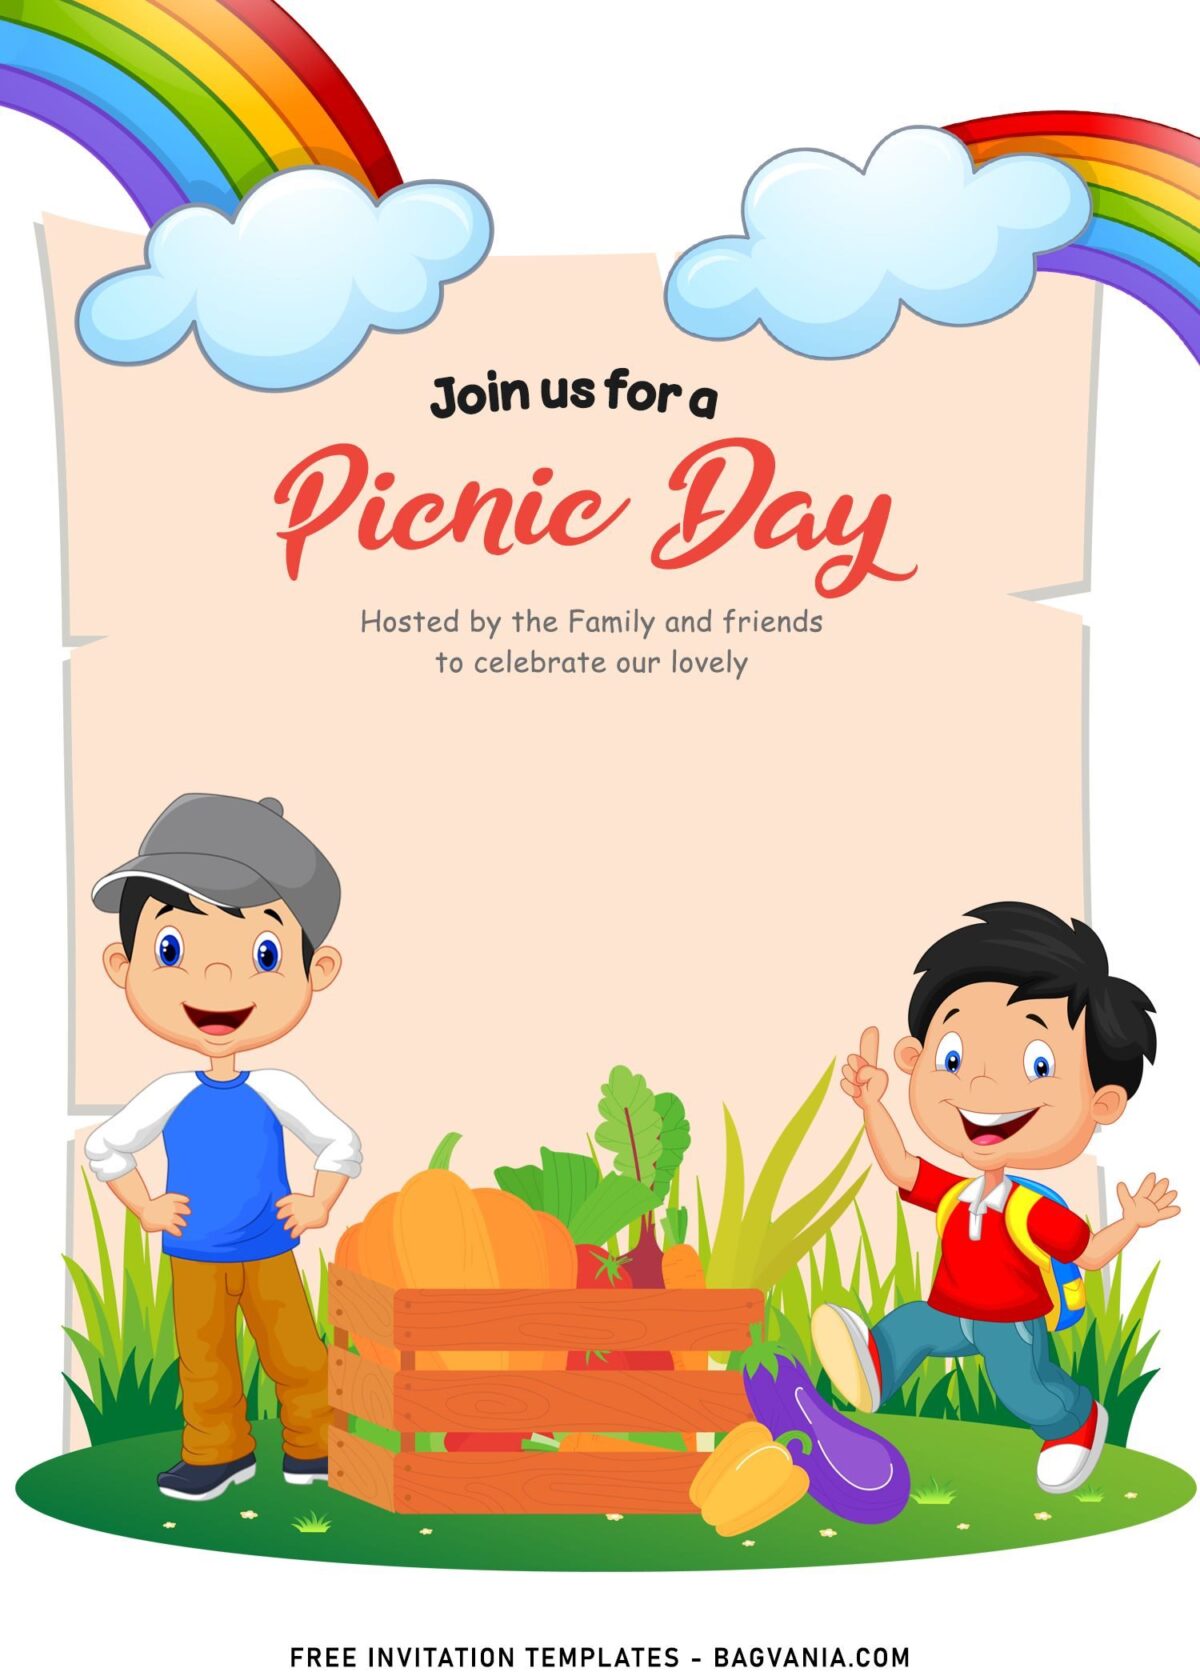 11+ Kids Picnic Day Birthday Invitation Templates Perfect For Spring with adorable kids